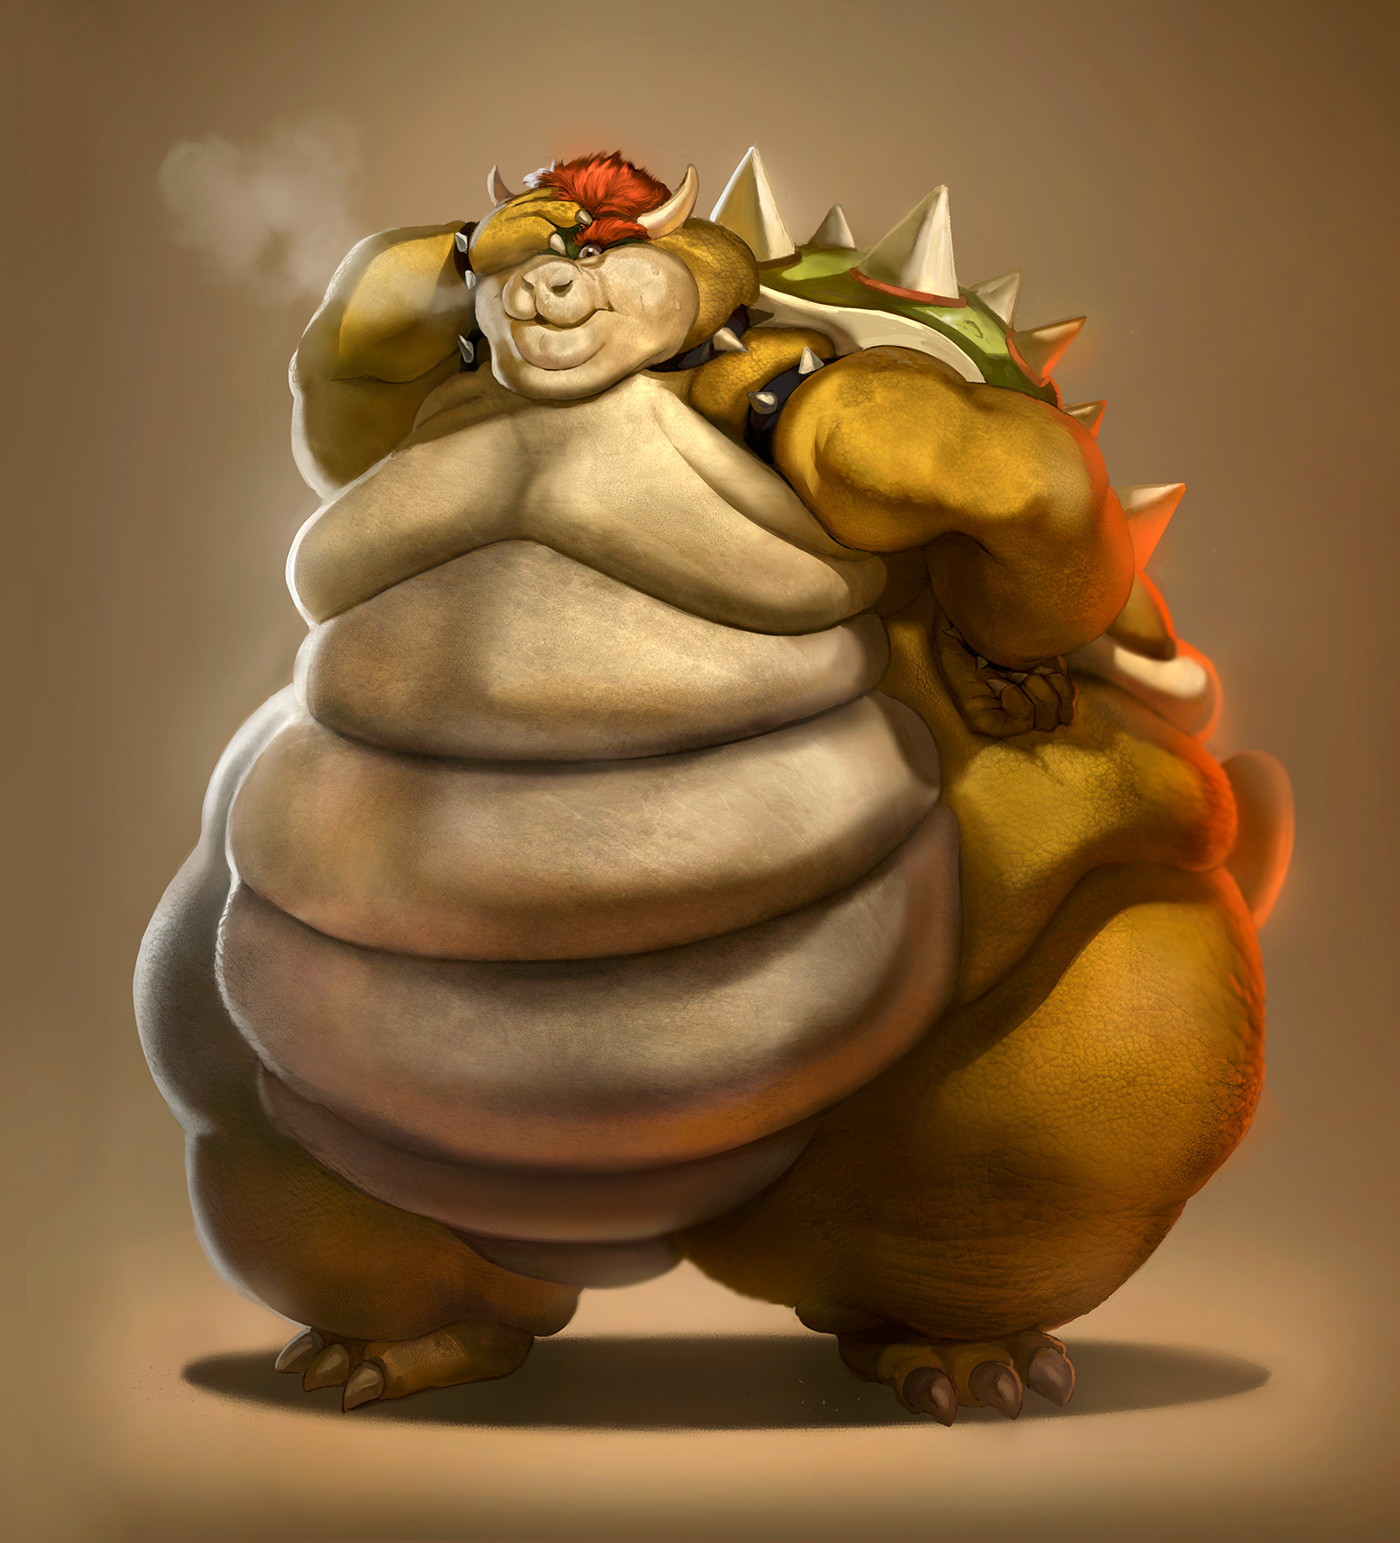 He is a pretty chunky character so I decided to maximise that characteristi...